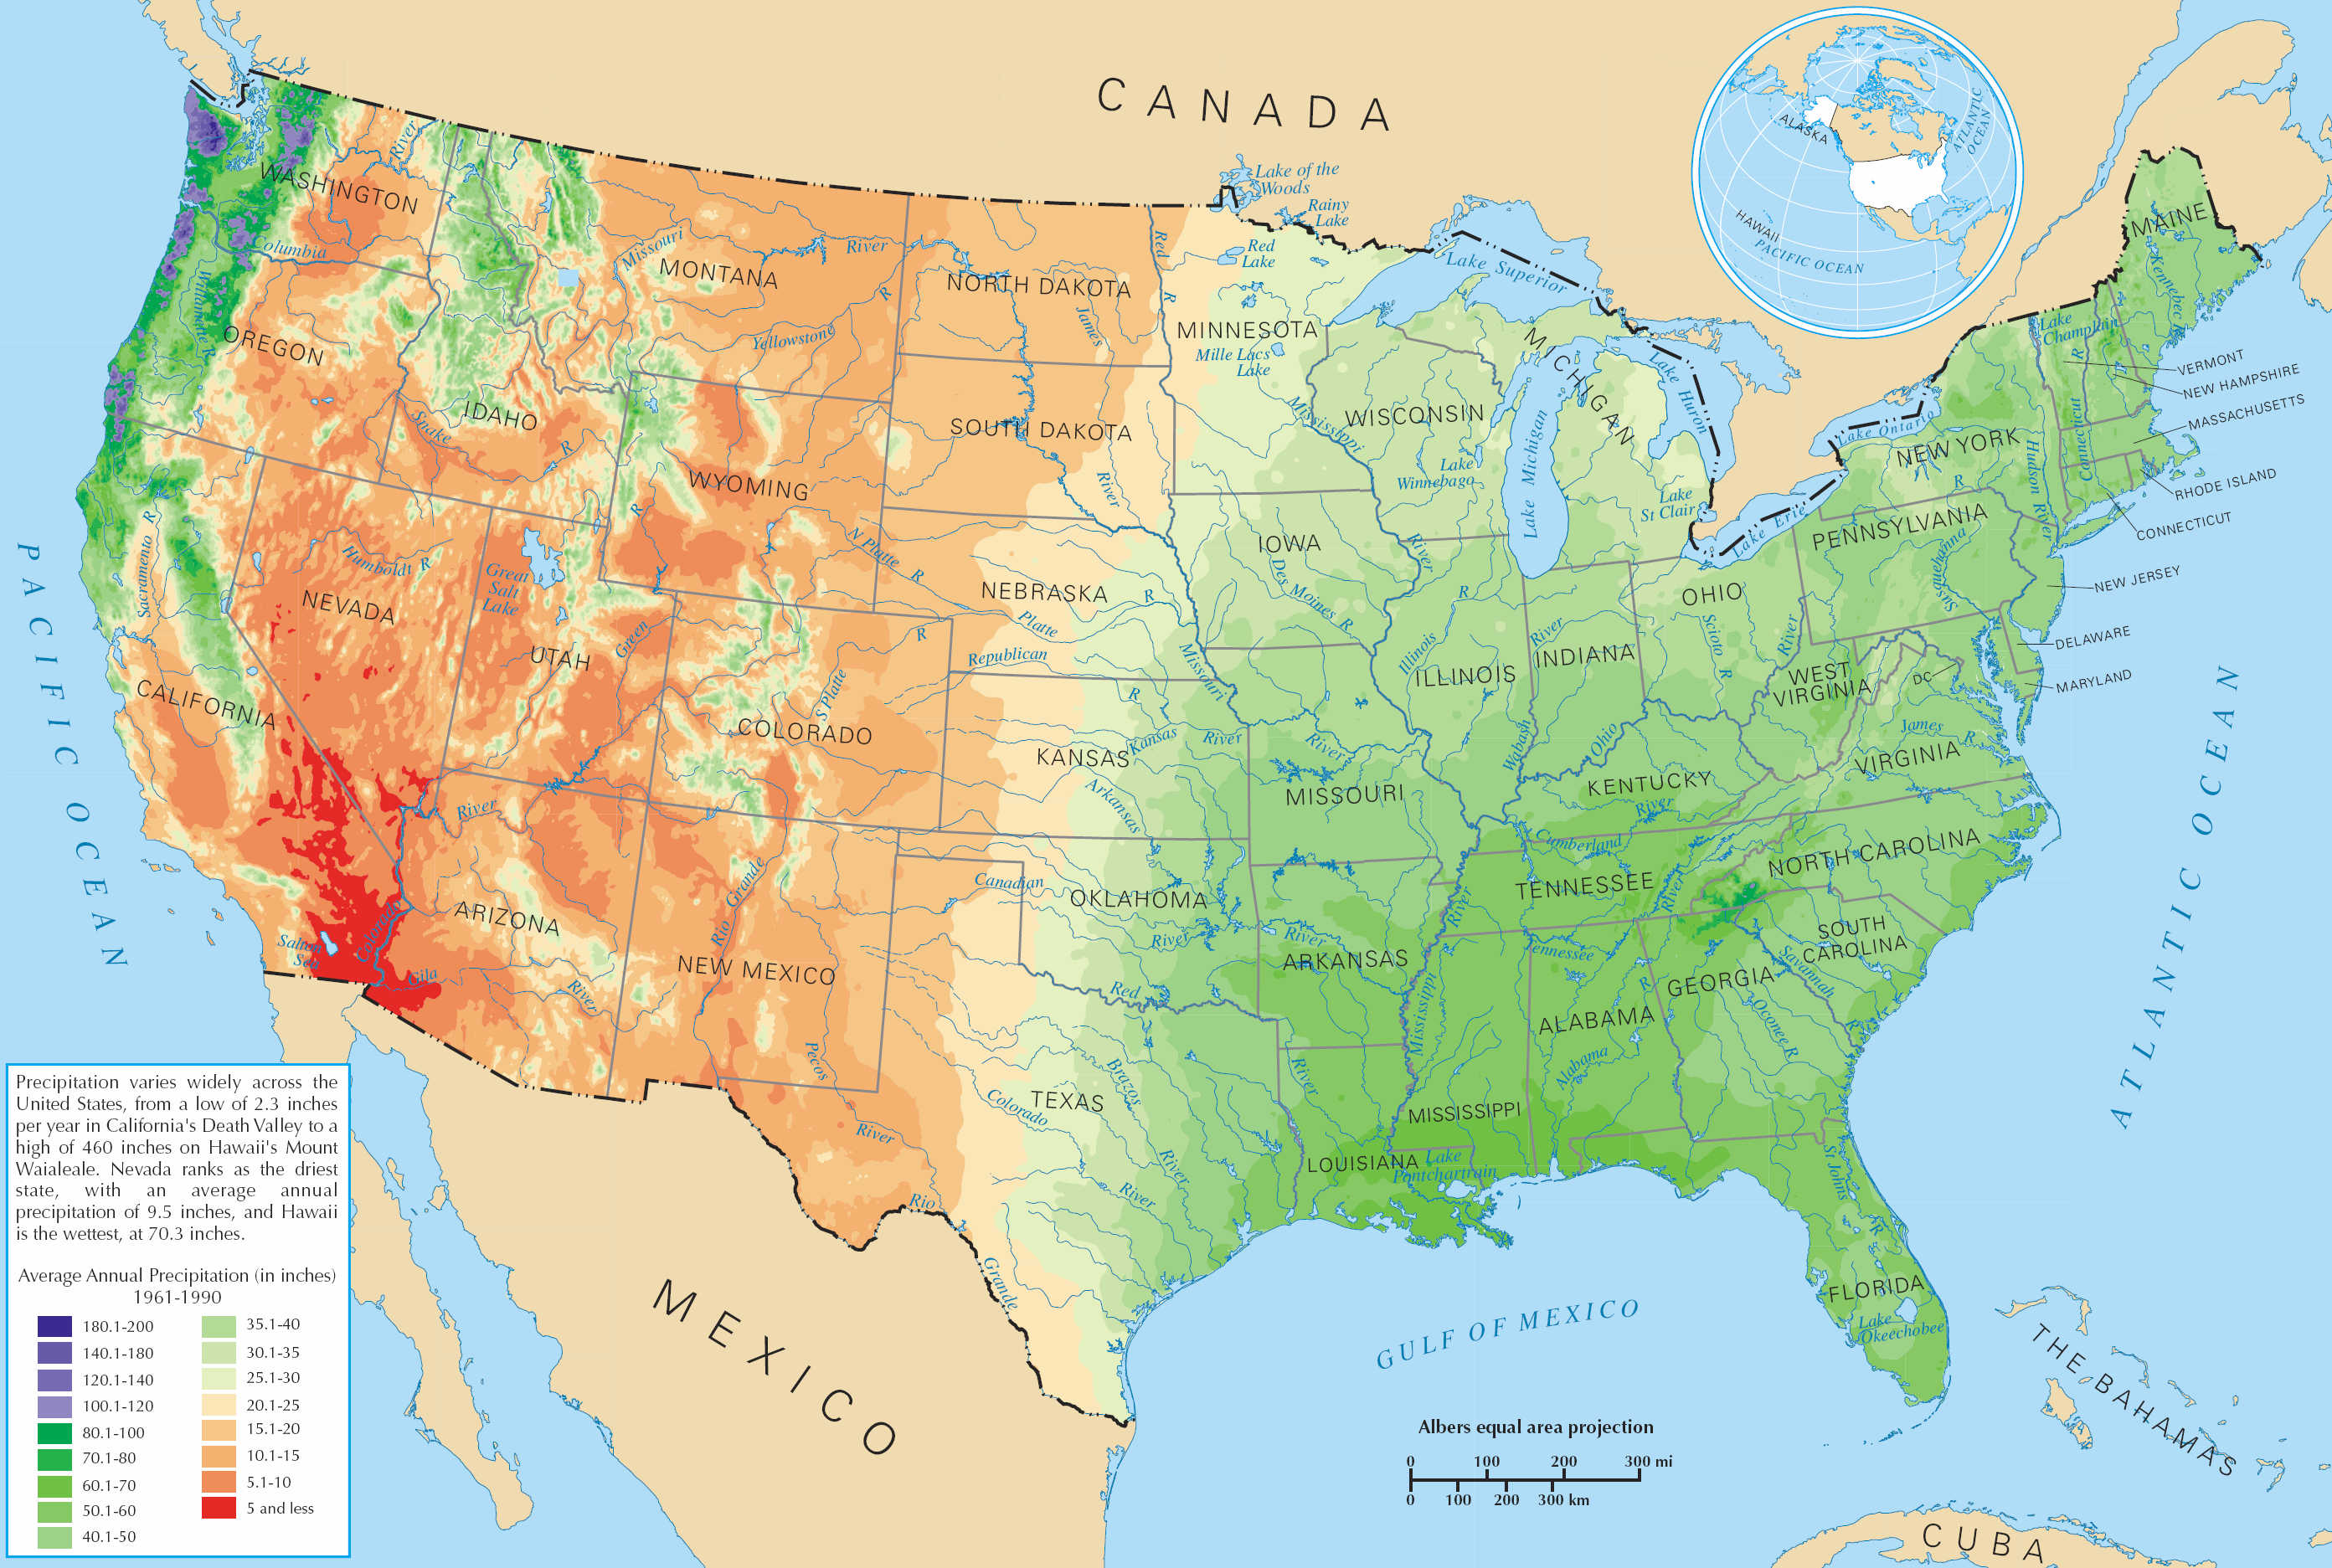 Average annual precipitation in the U.S. From the Midwest to the East Coast receives 30 - 60 inches per year. Most of the West gets between 10 a 20 inches, with the exception of Northwest California, Western Oregon, and Western Washington, which gets more than 50 inches per year.